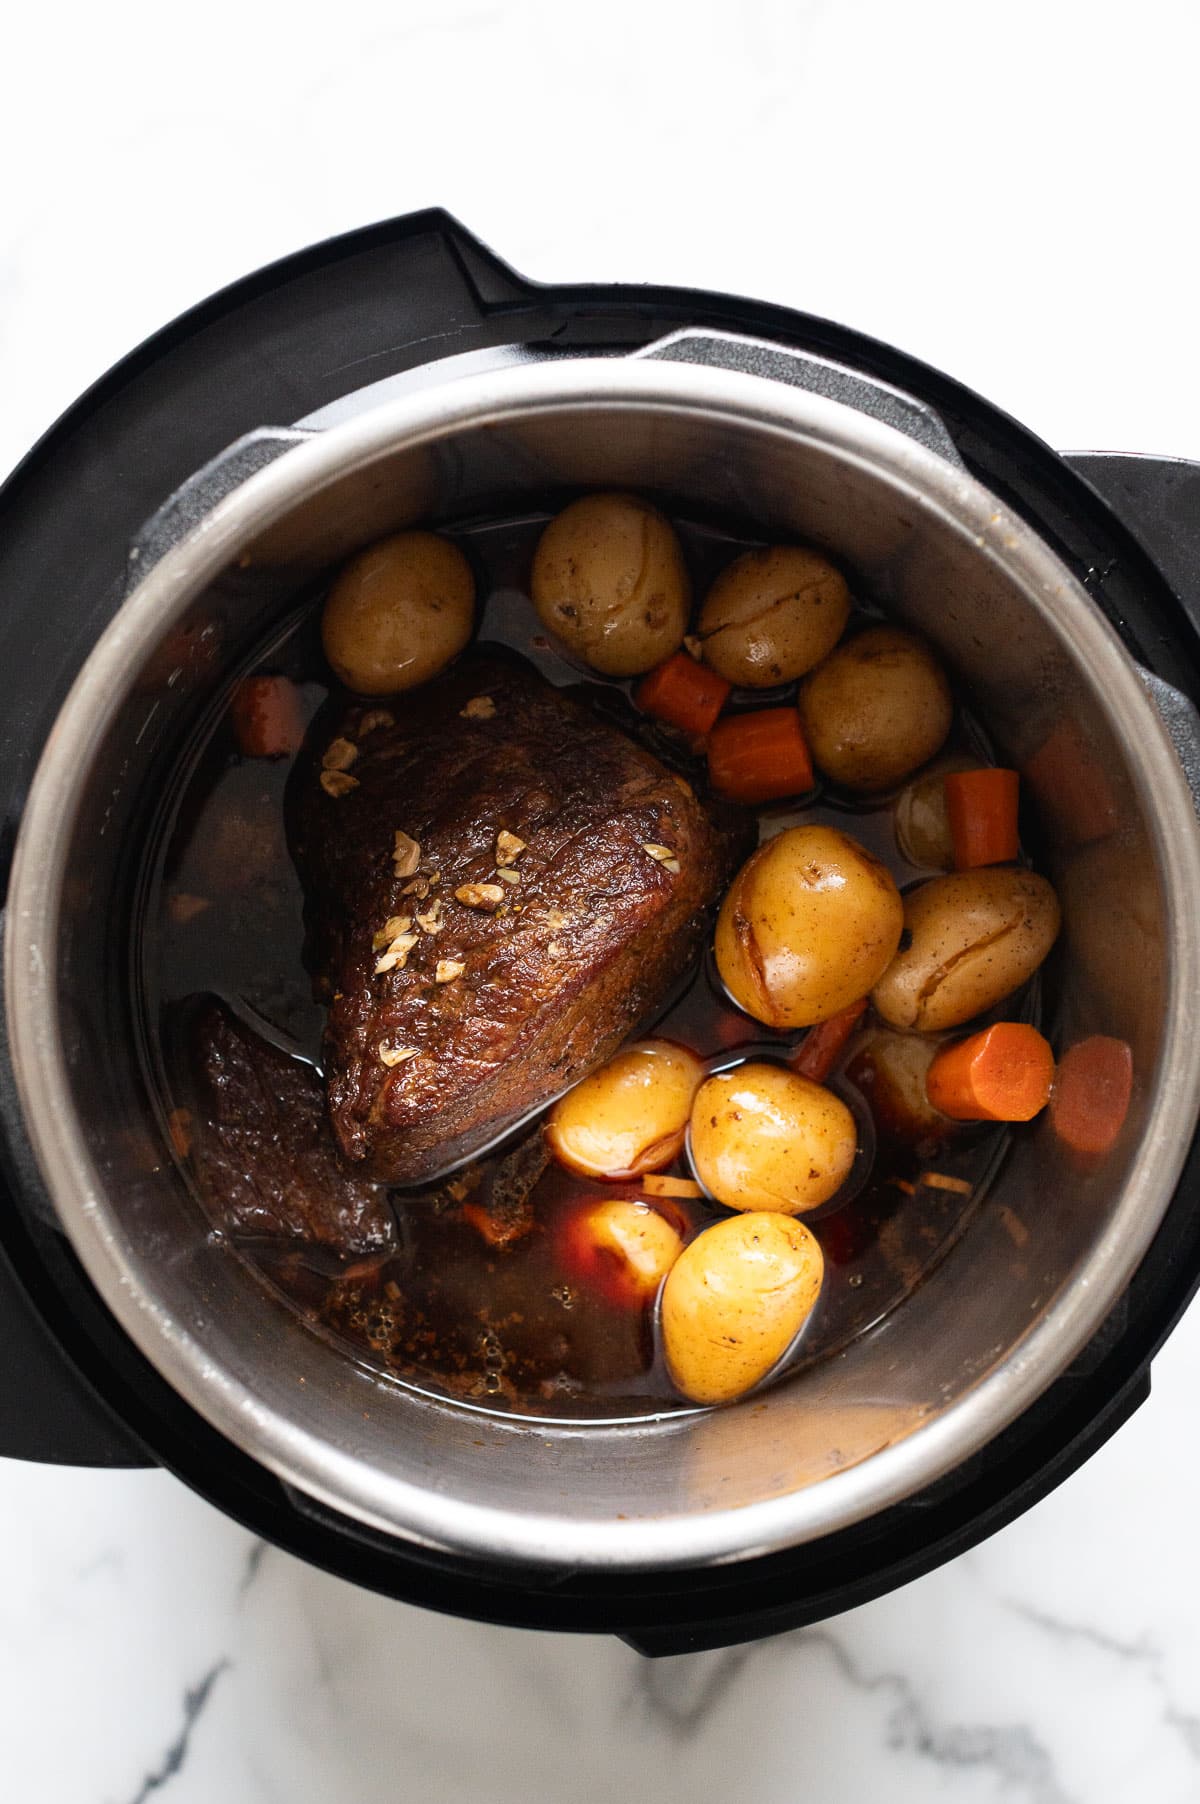 Sirloin tip roast in instant pot with carrots and baby potatoes in au jus.